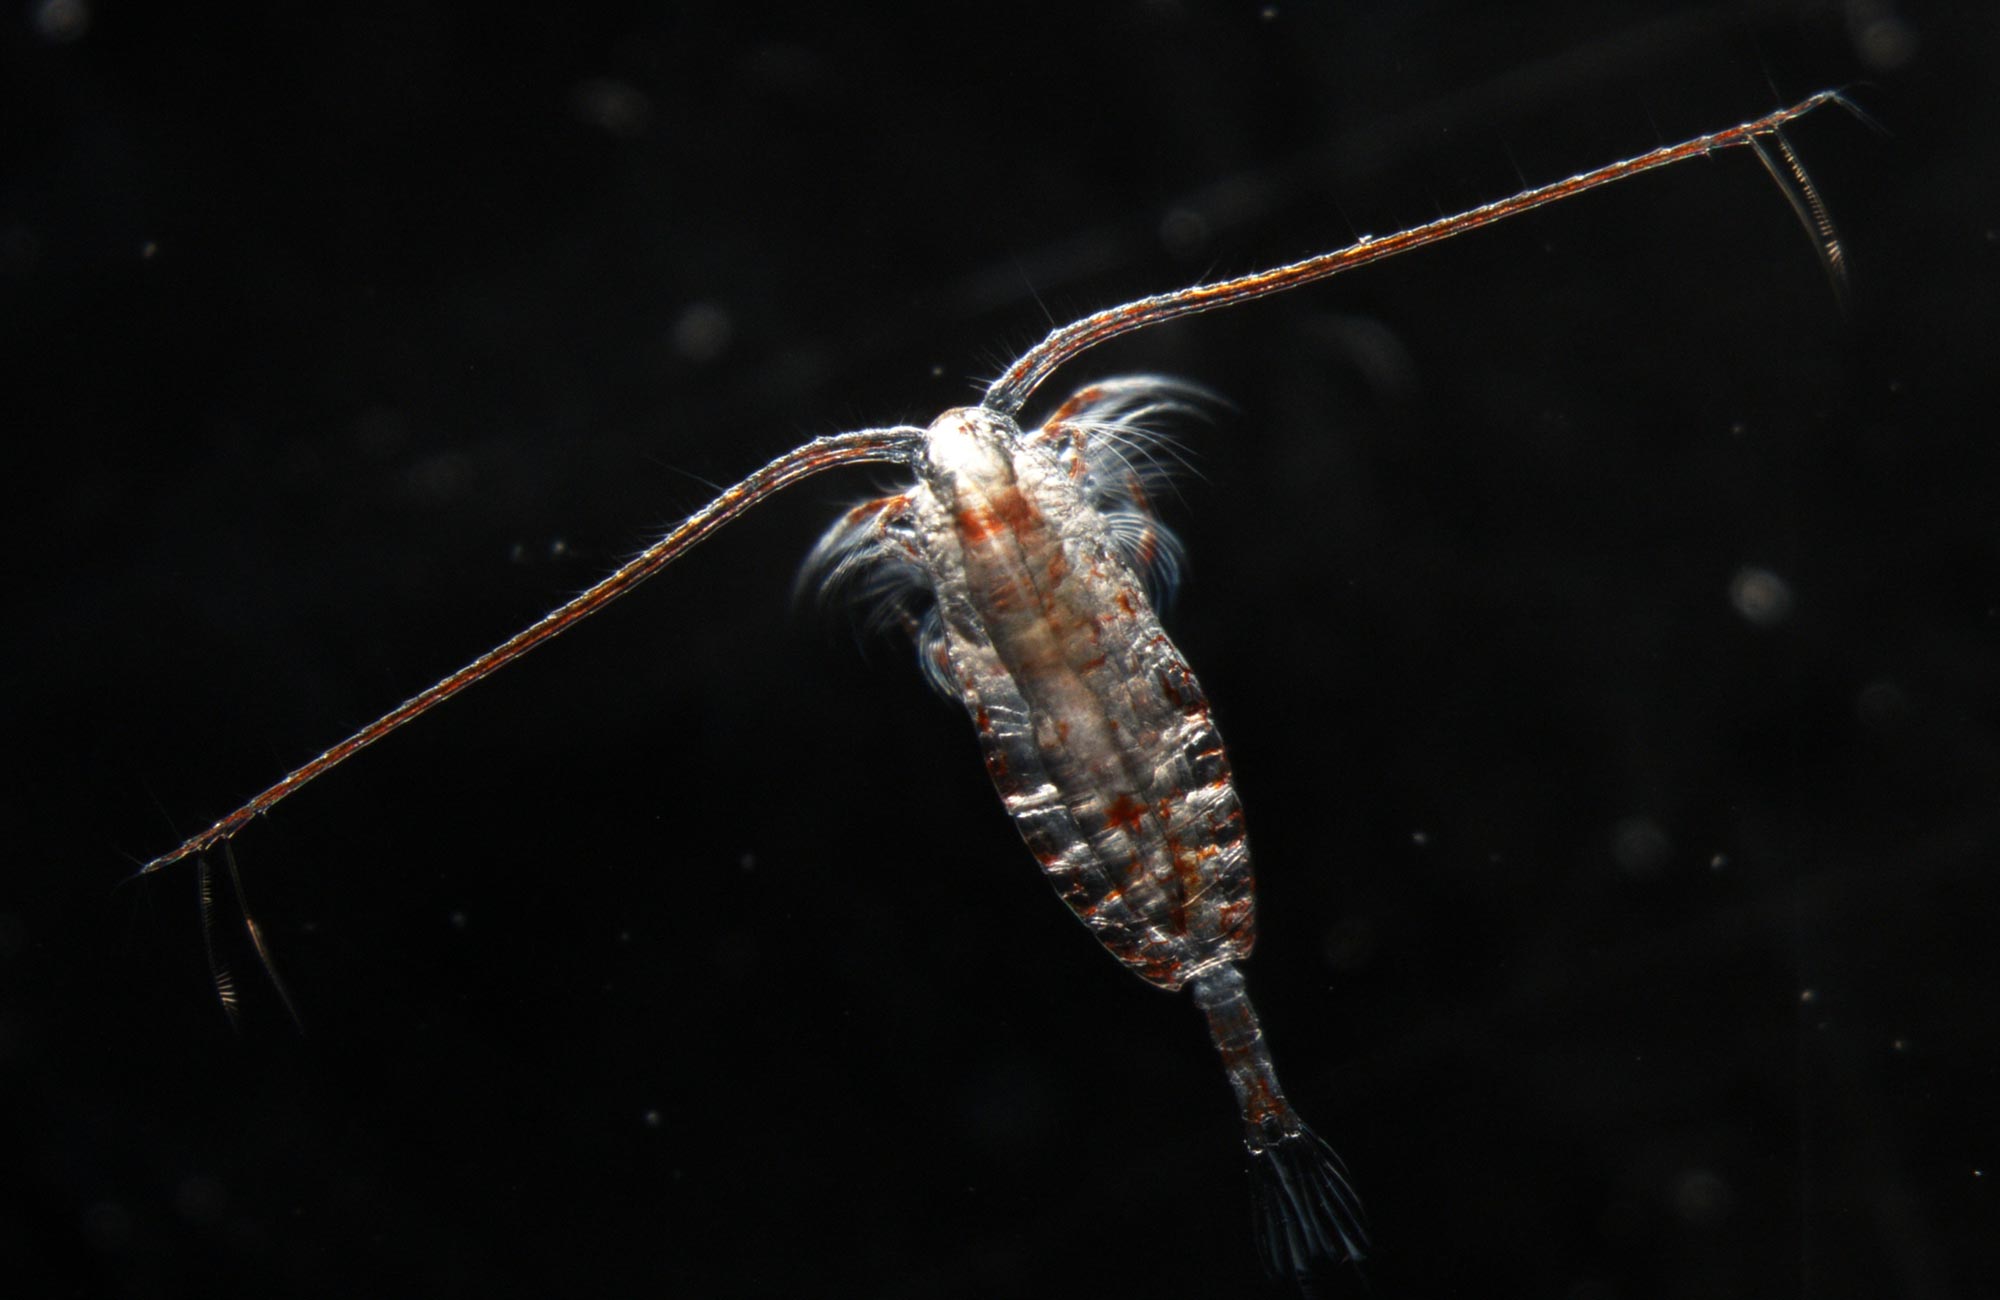 Microscopic image of a copepod on a black background